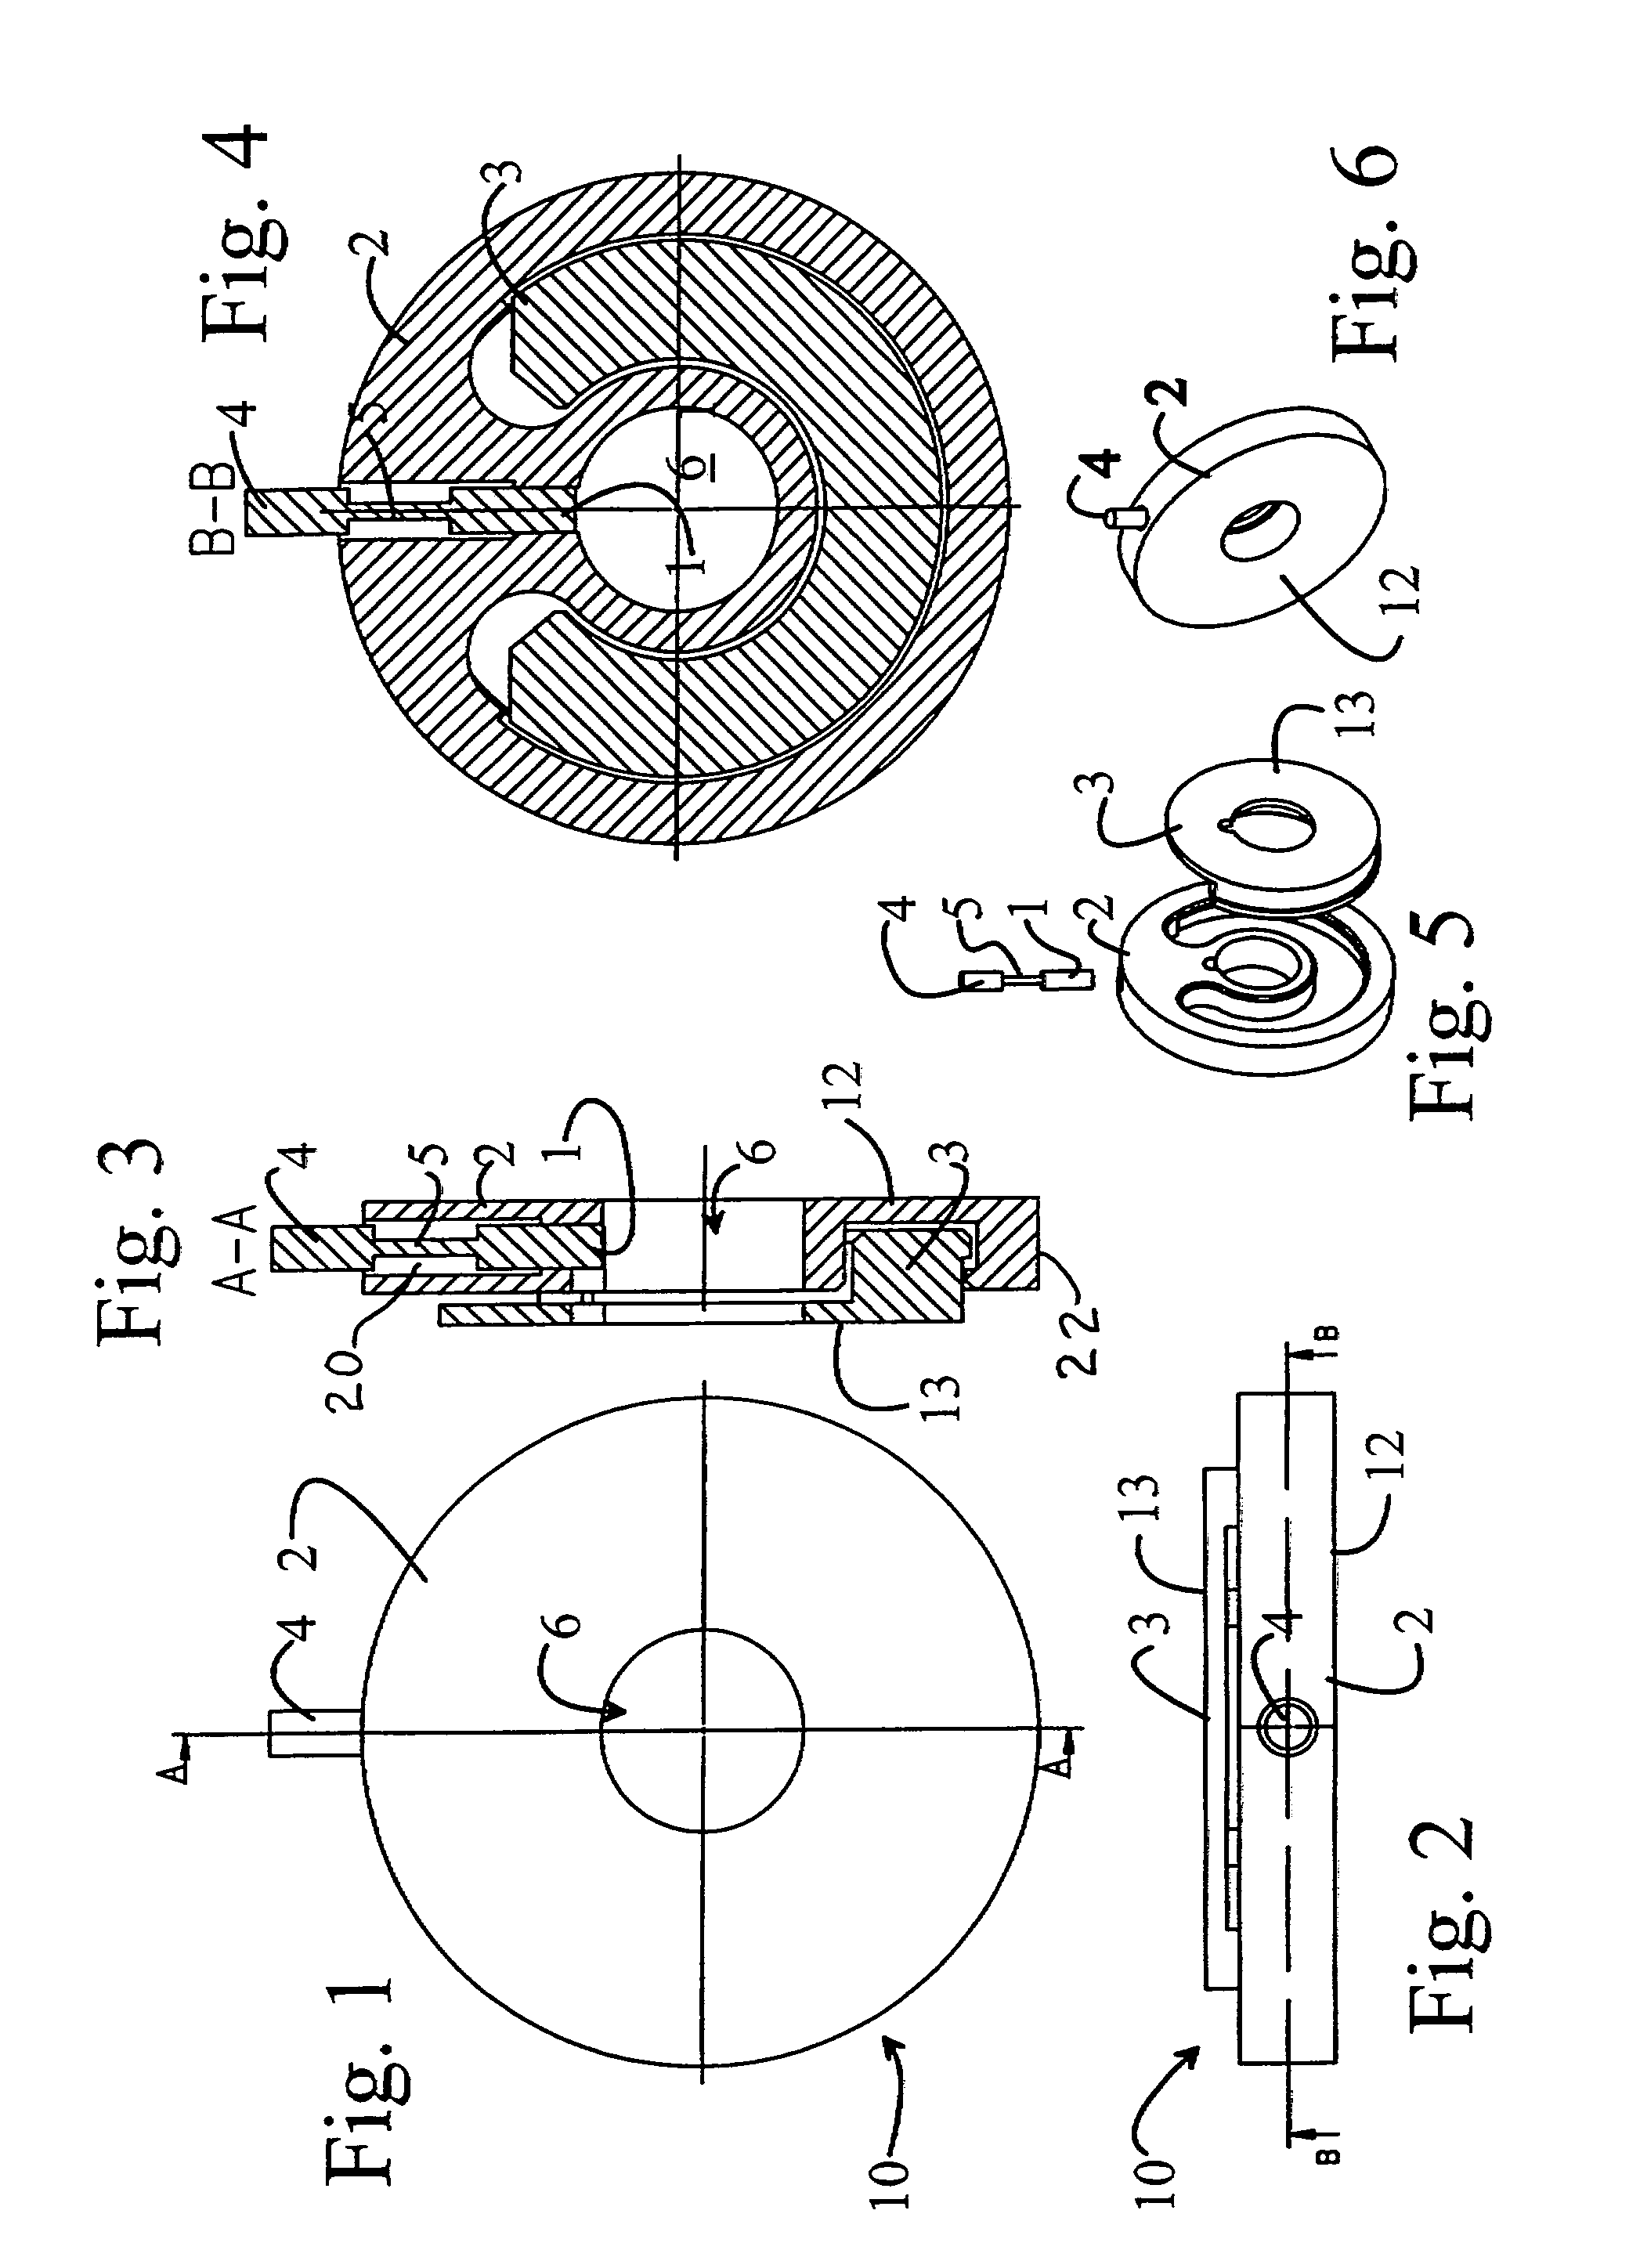 Electrode structure for measuring electrical responses from the human body